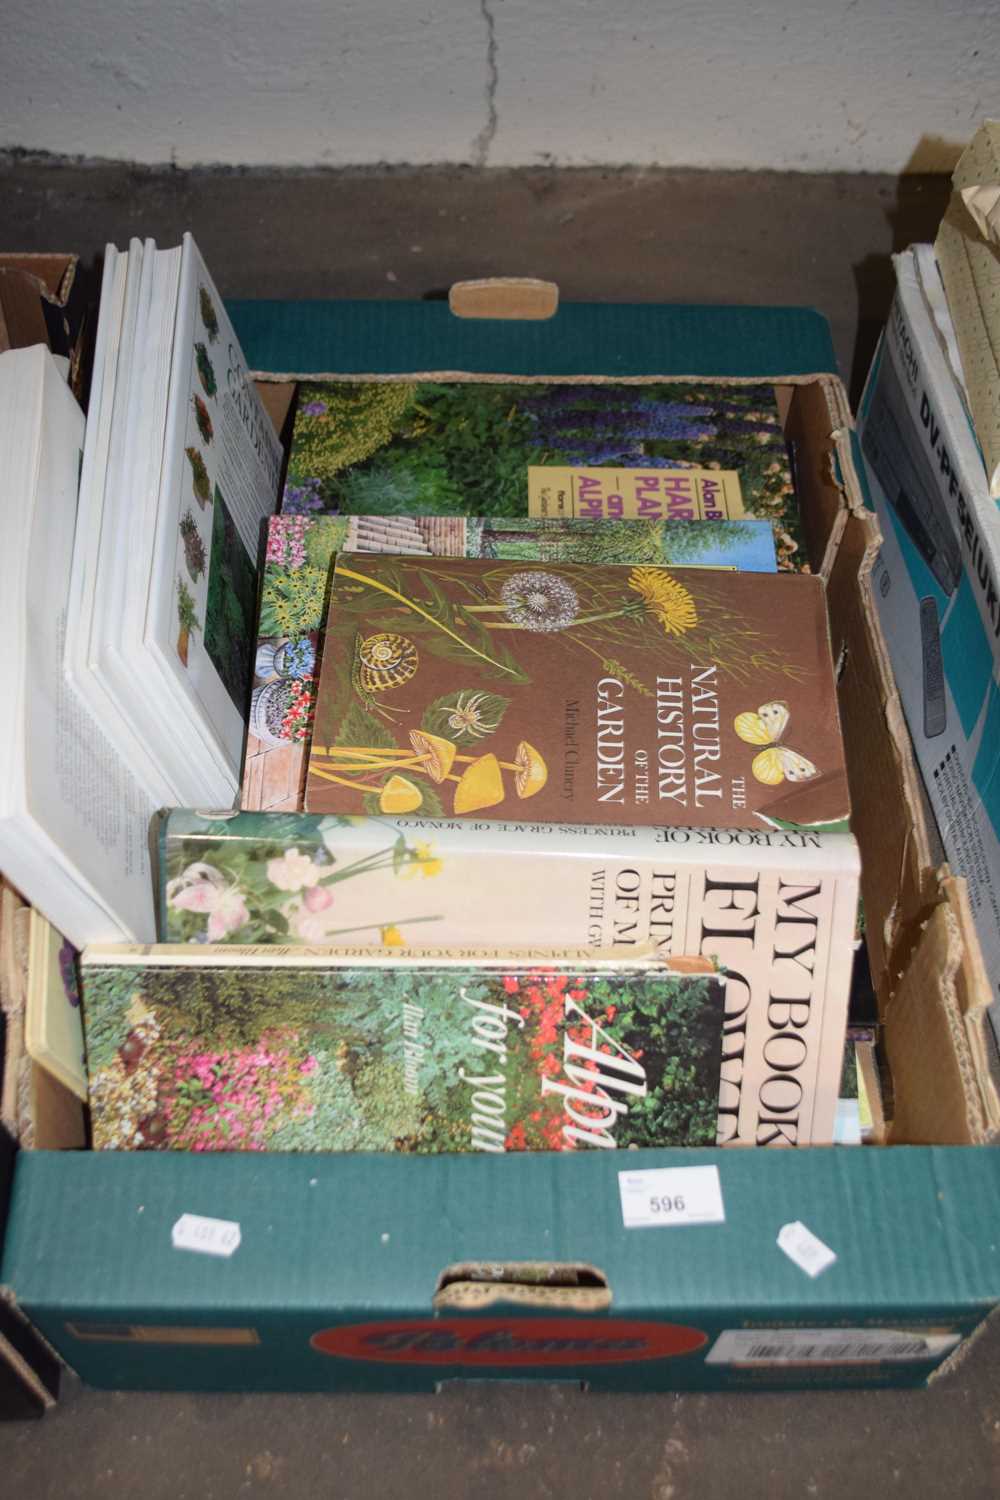 Books, mainly horticulture